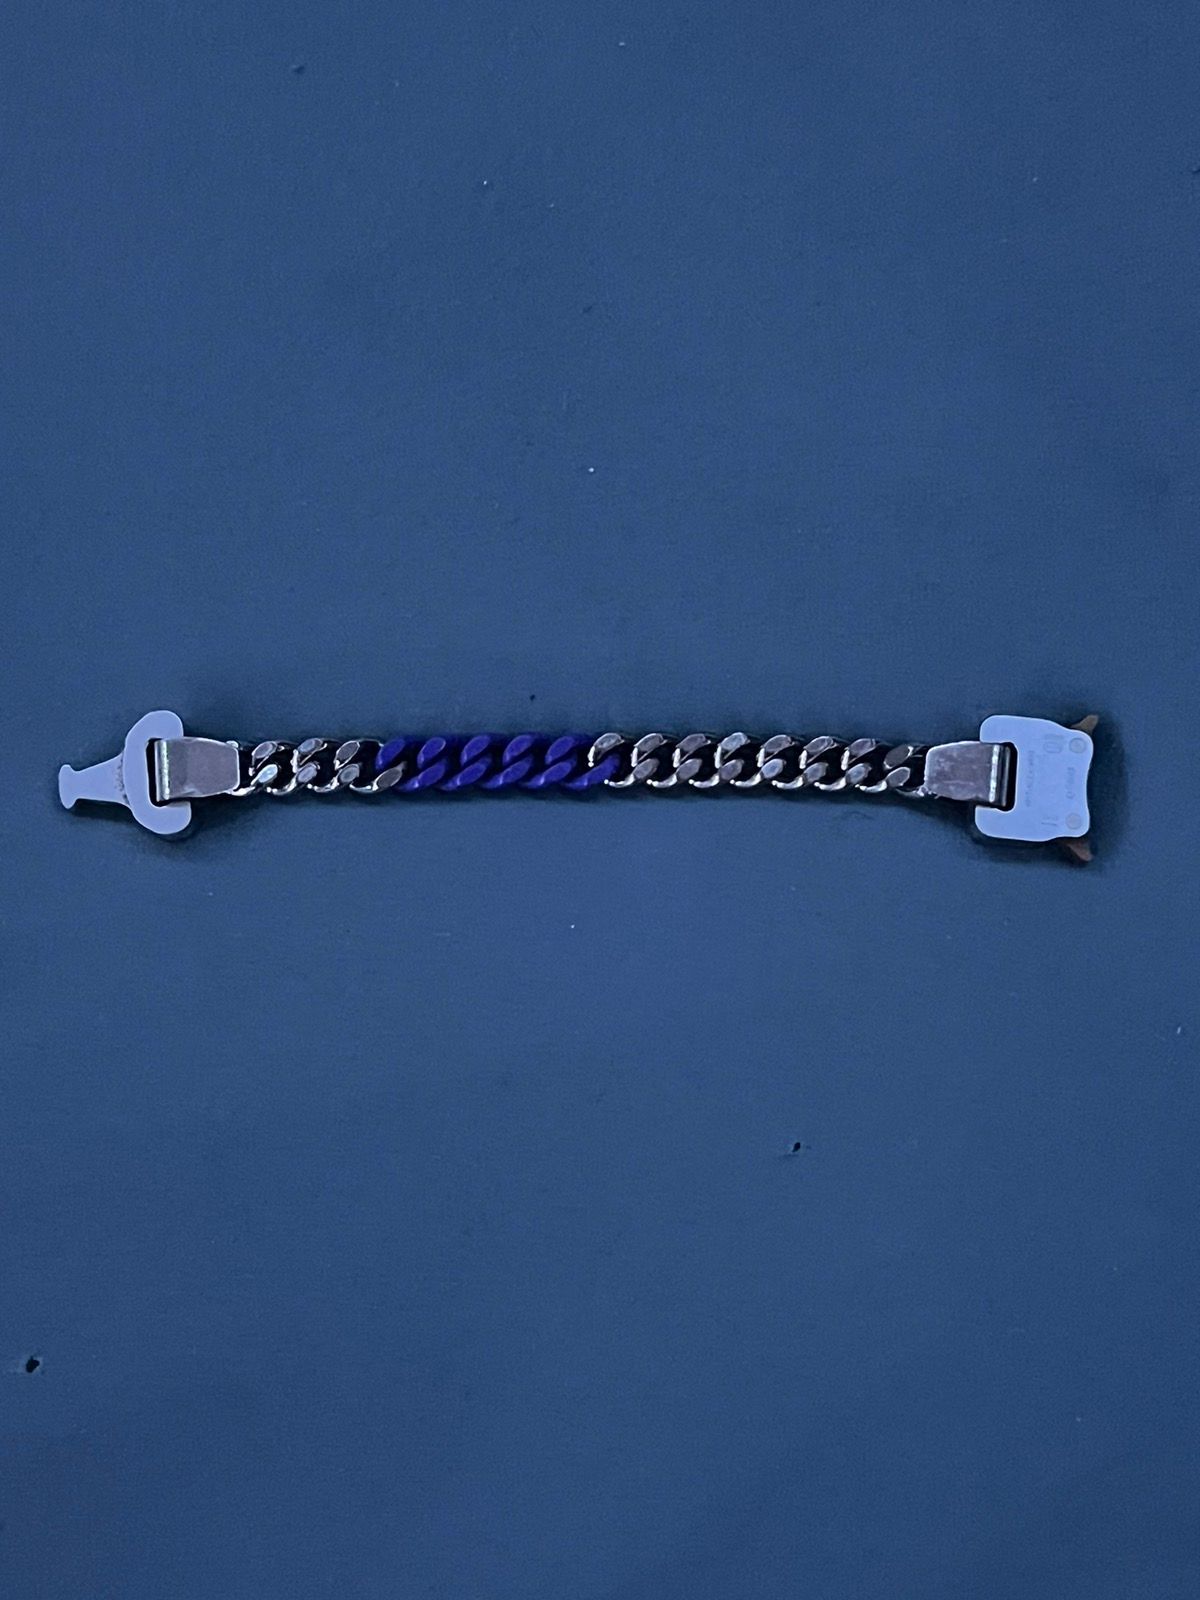 Alyx 1017 Alyx 9sm purple and silver buckle braclet | Grailed